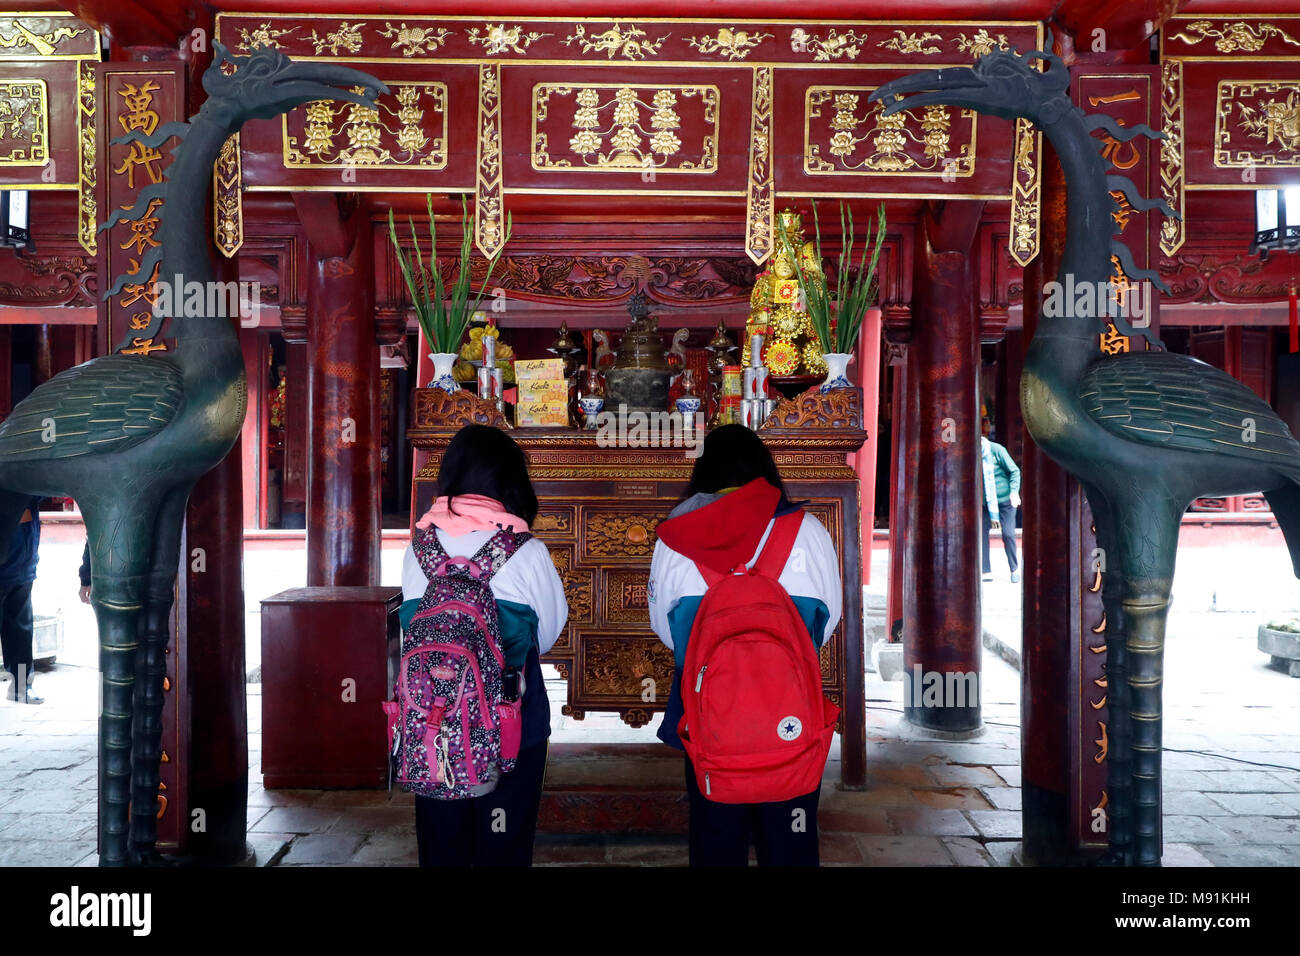 The Temple of Literature is Confucian temple which was formerly a center of learning in Hanoi.   Altar of Confucius.  Hanoi. Vietnam. Stock Photo